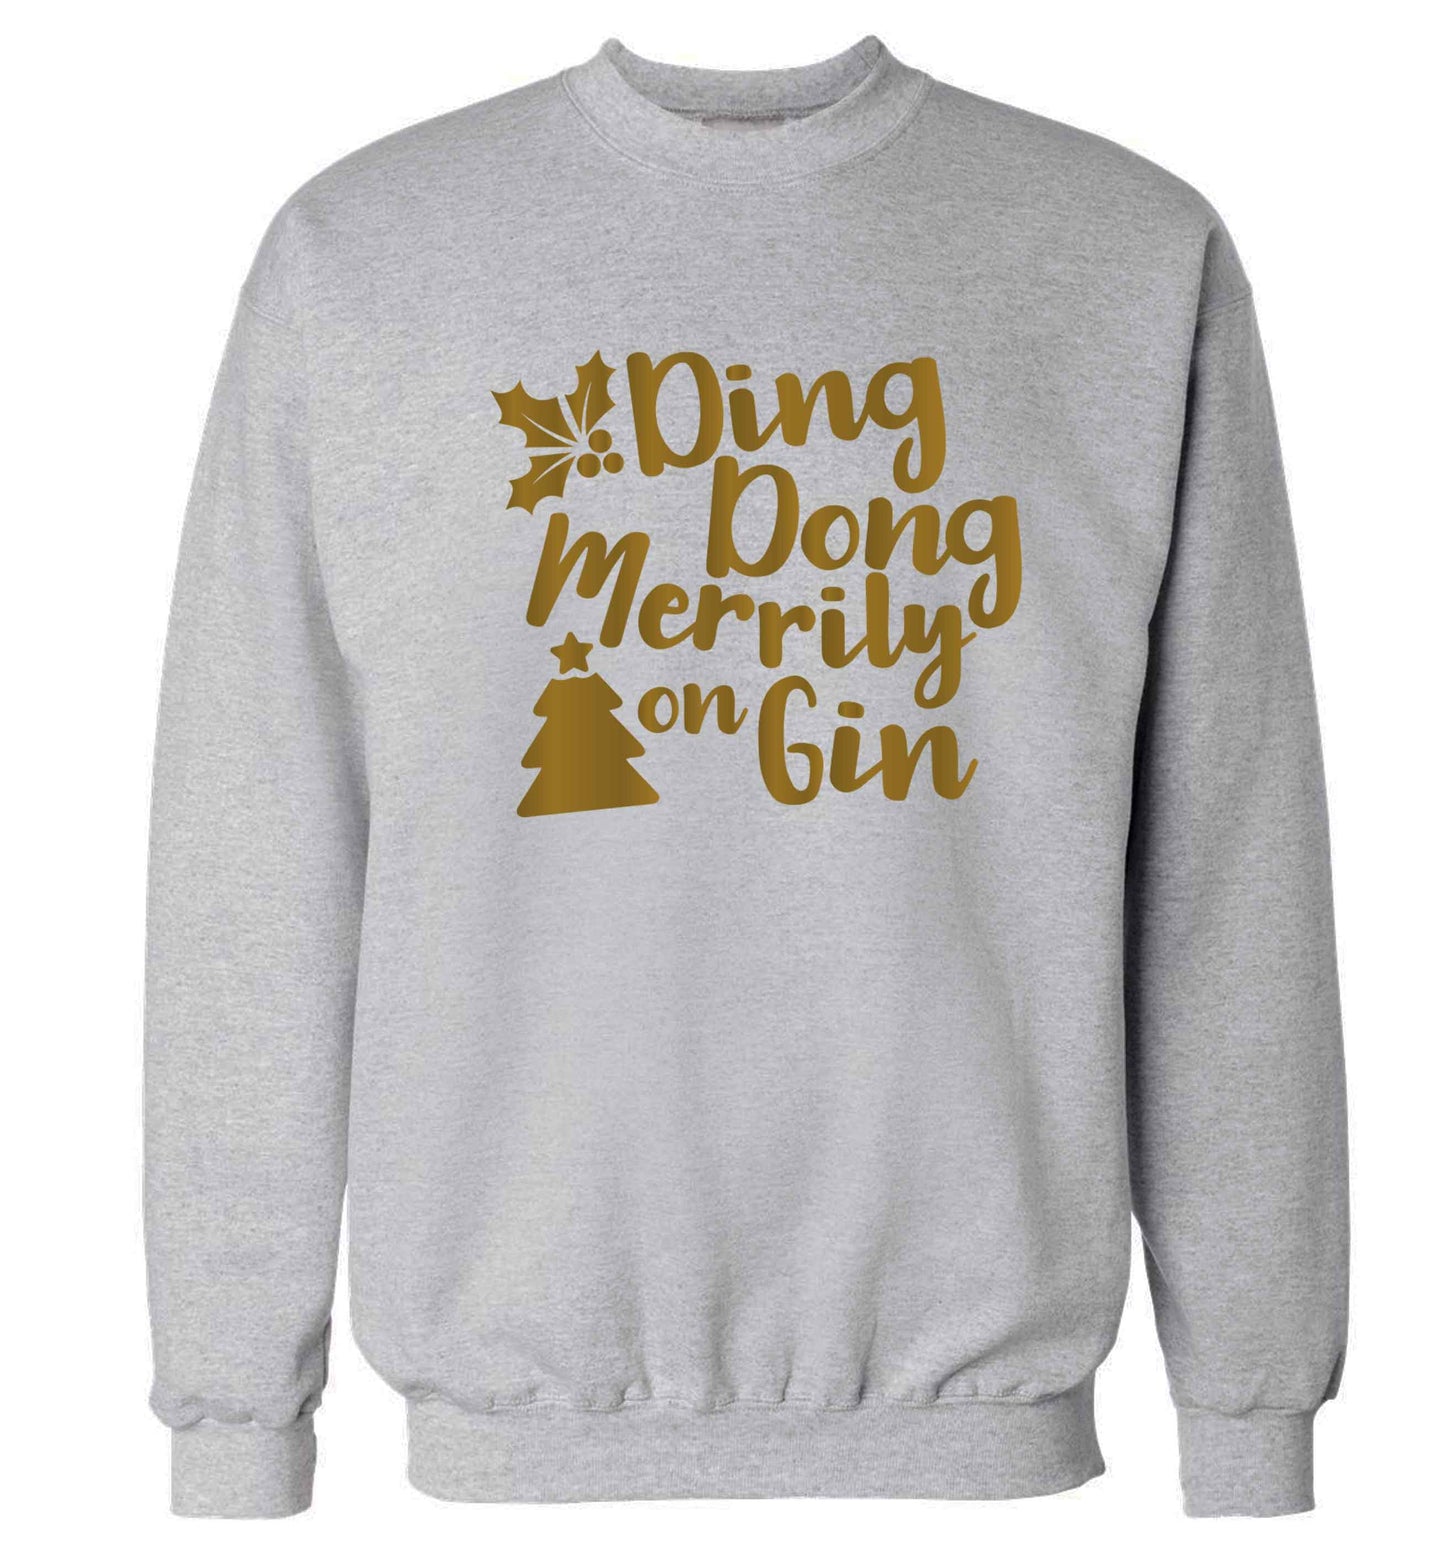 Ding dong merrily on gin Adult's unisex grey Sweater 2XL